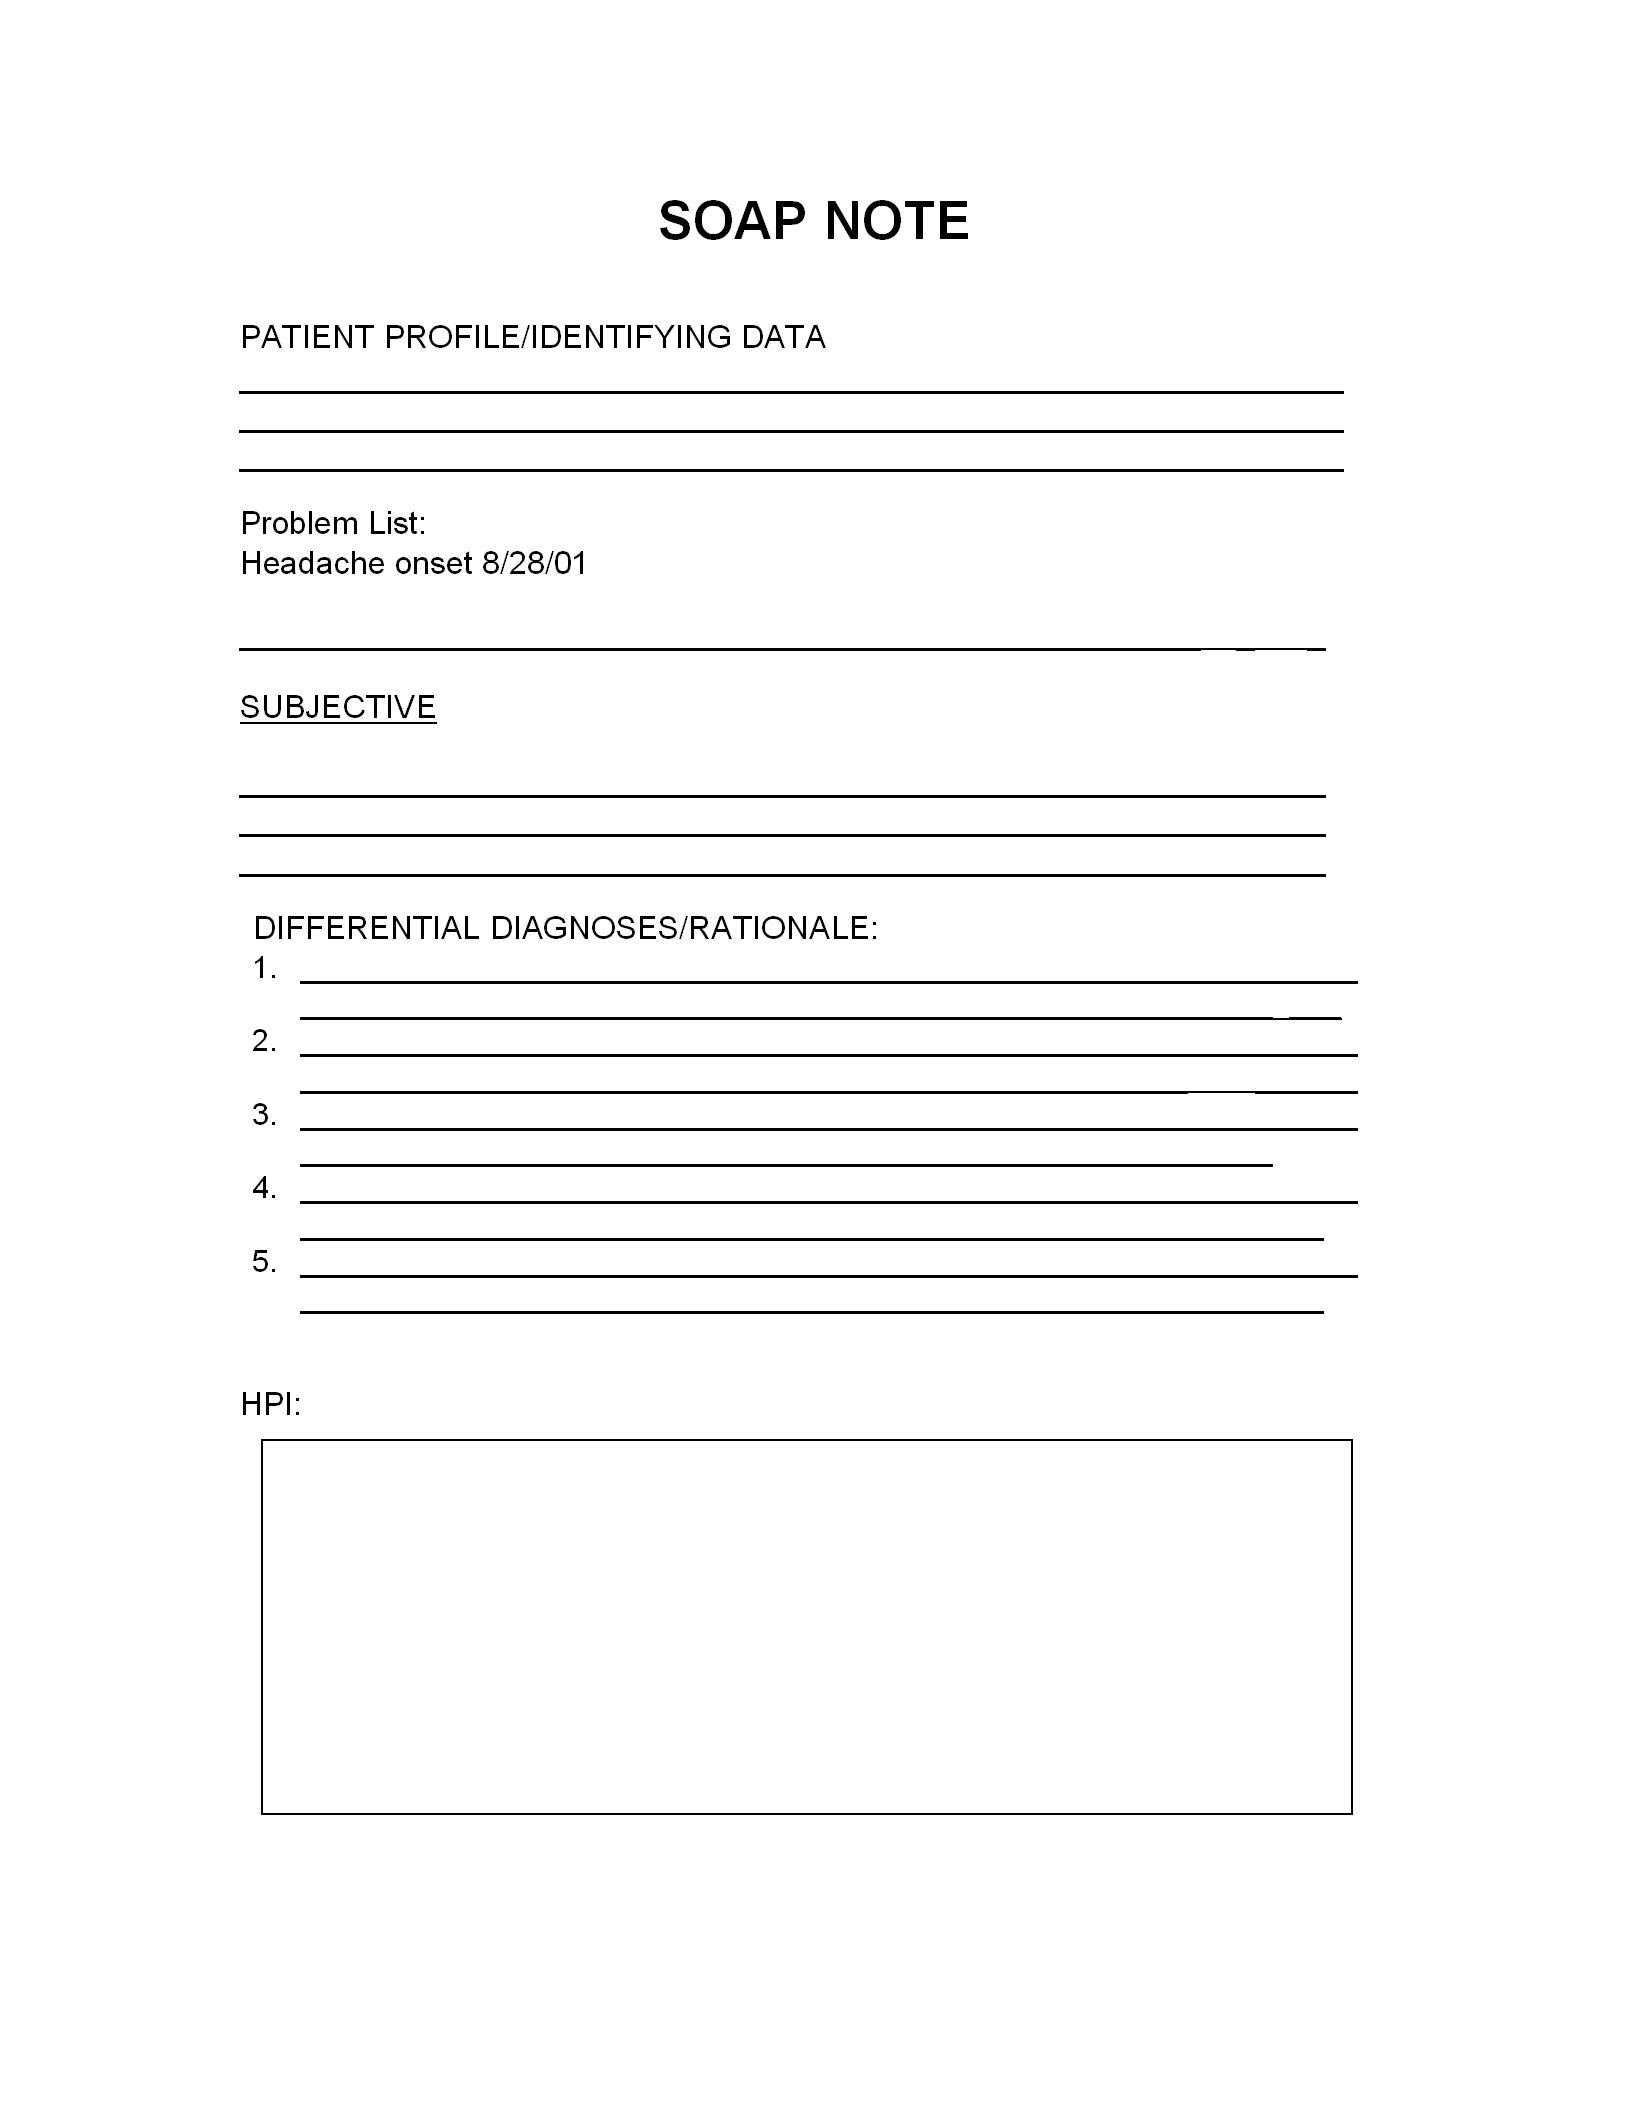 Wps Template - Free Download Writer, Presentation Inside Soap Note Template Word